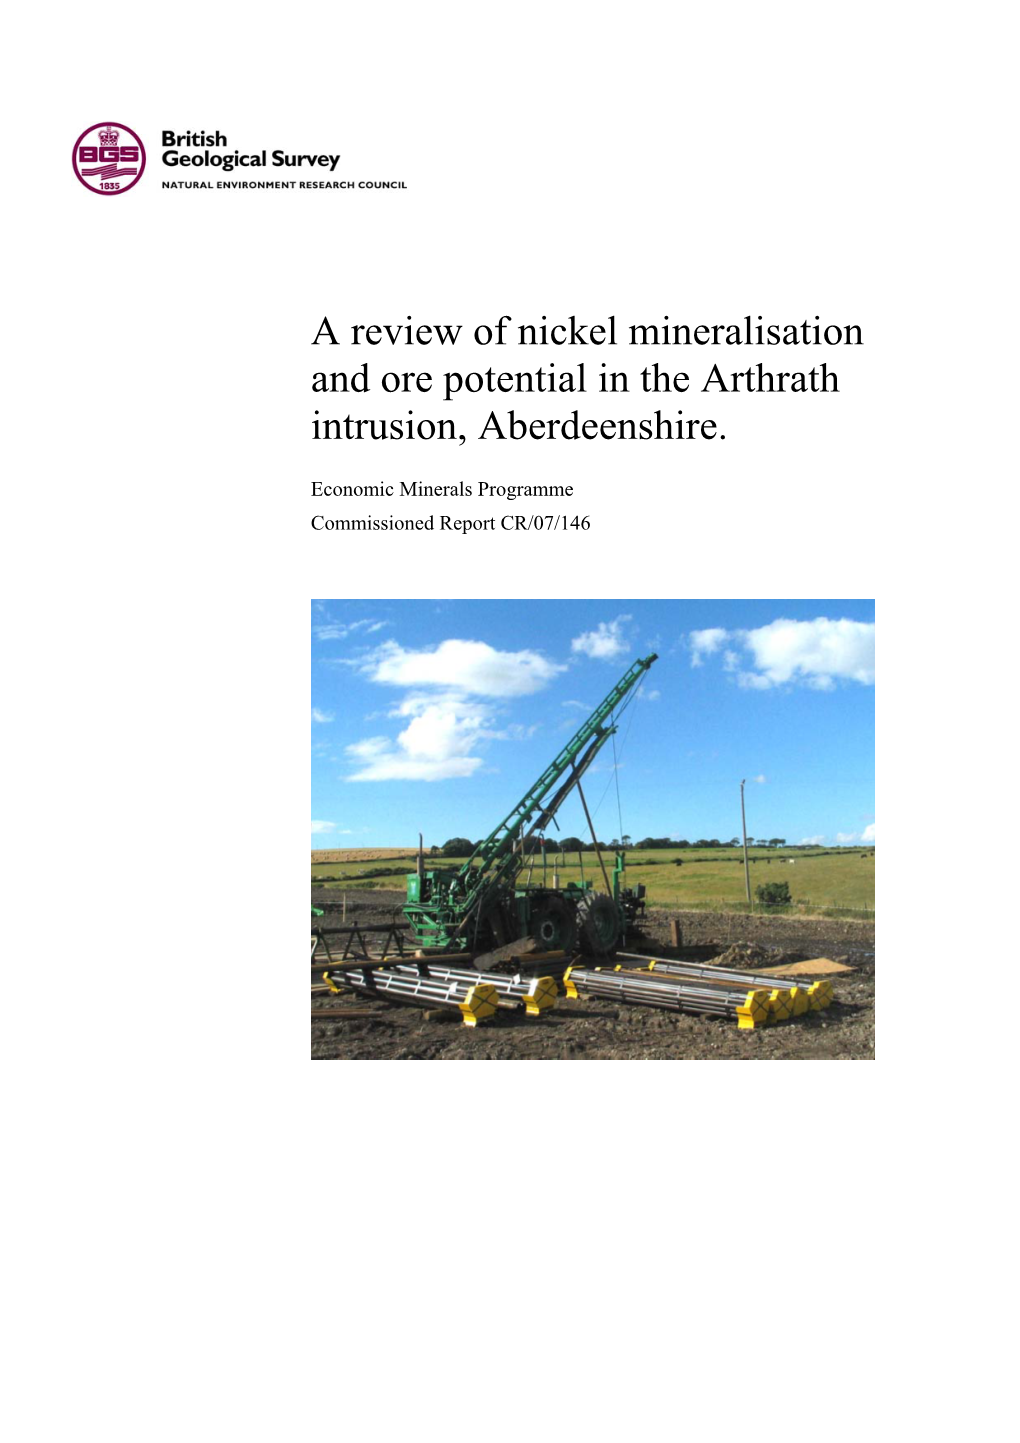 A Review of Nickel Mineralisation and Ore Potential in the Arthrath Intrusion, Aberdeenshire